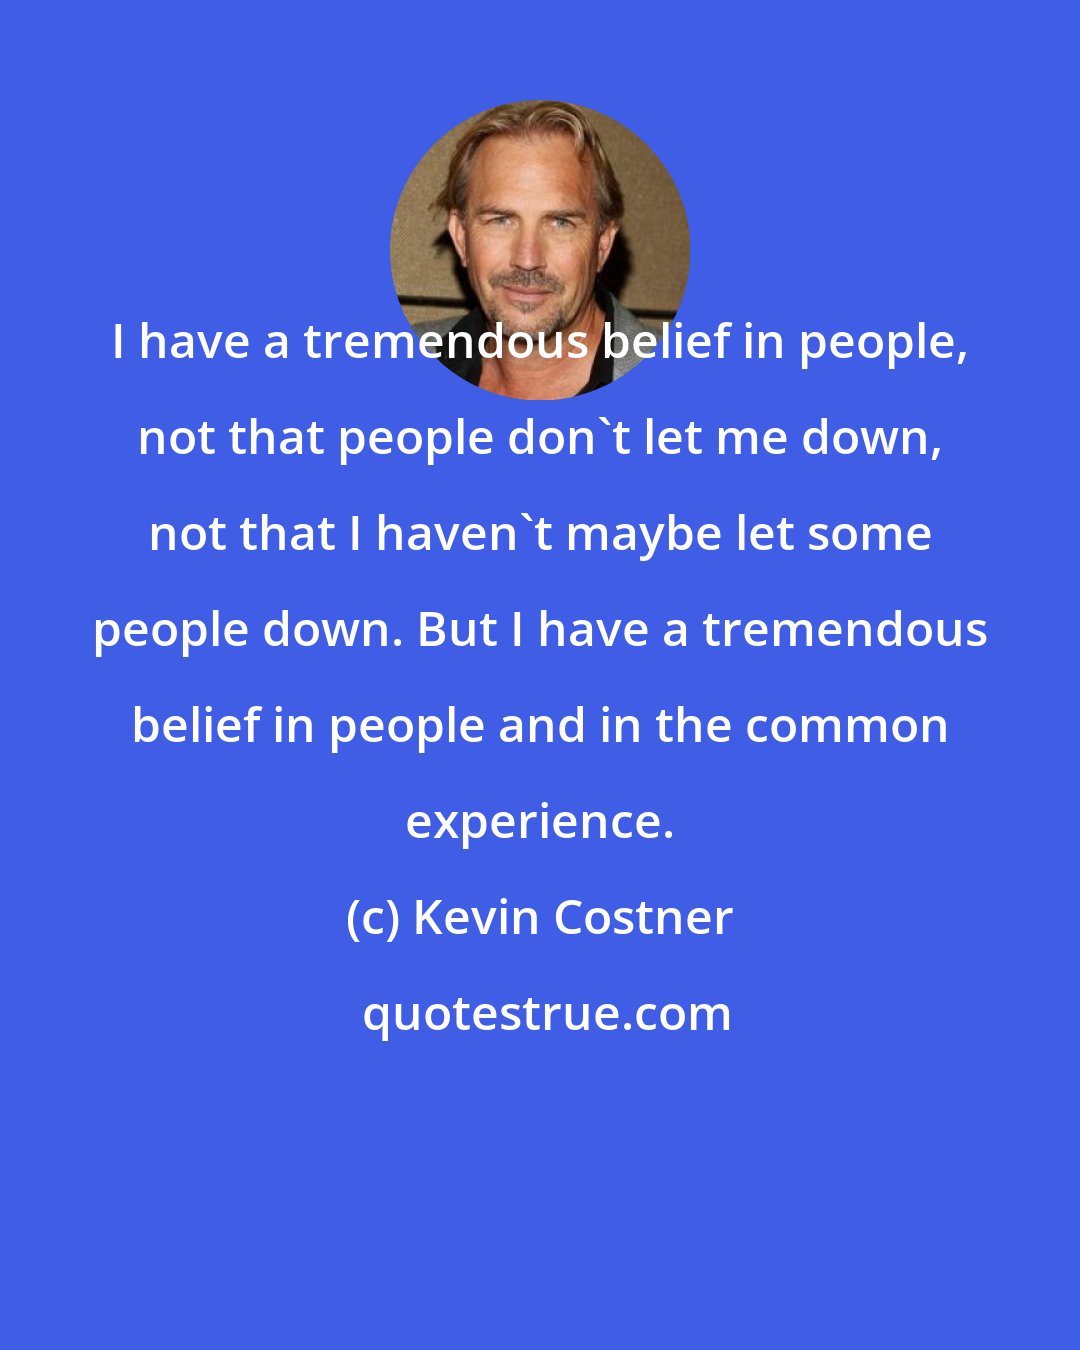 Kevin Costner: I have a tremendous belief in people, not that people don't let me down, not that I haven't maybe let some people down. But I have a tremendous belief in people and in the common experience.